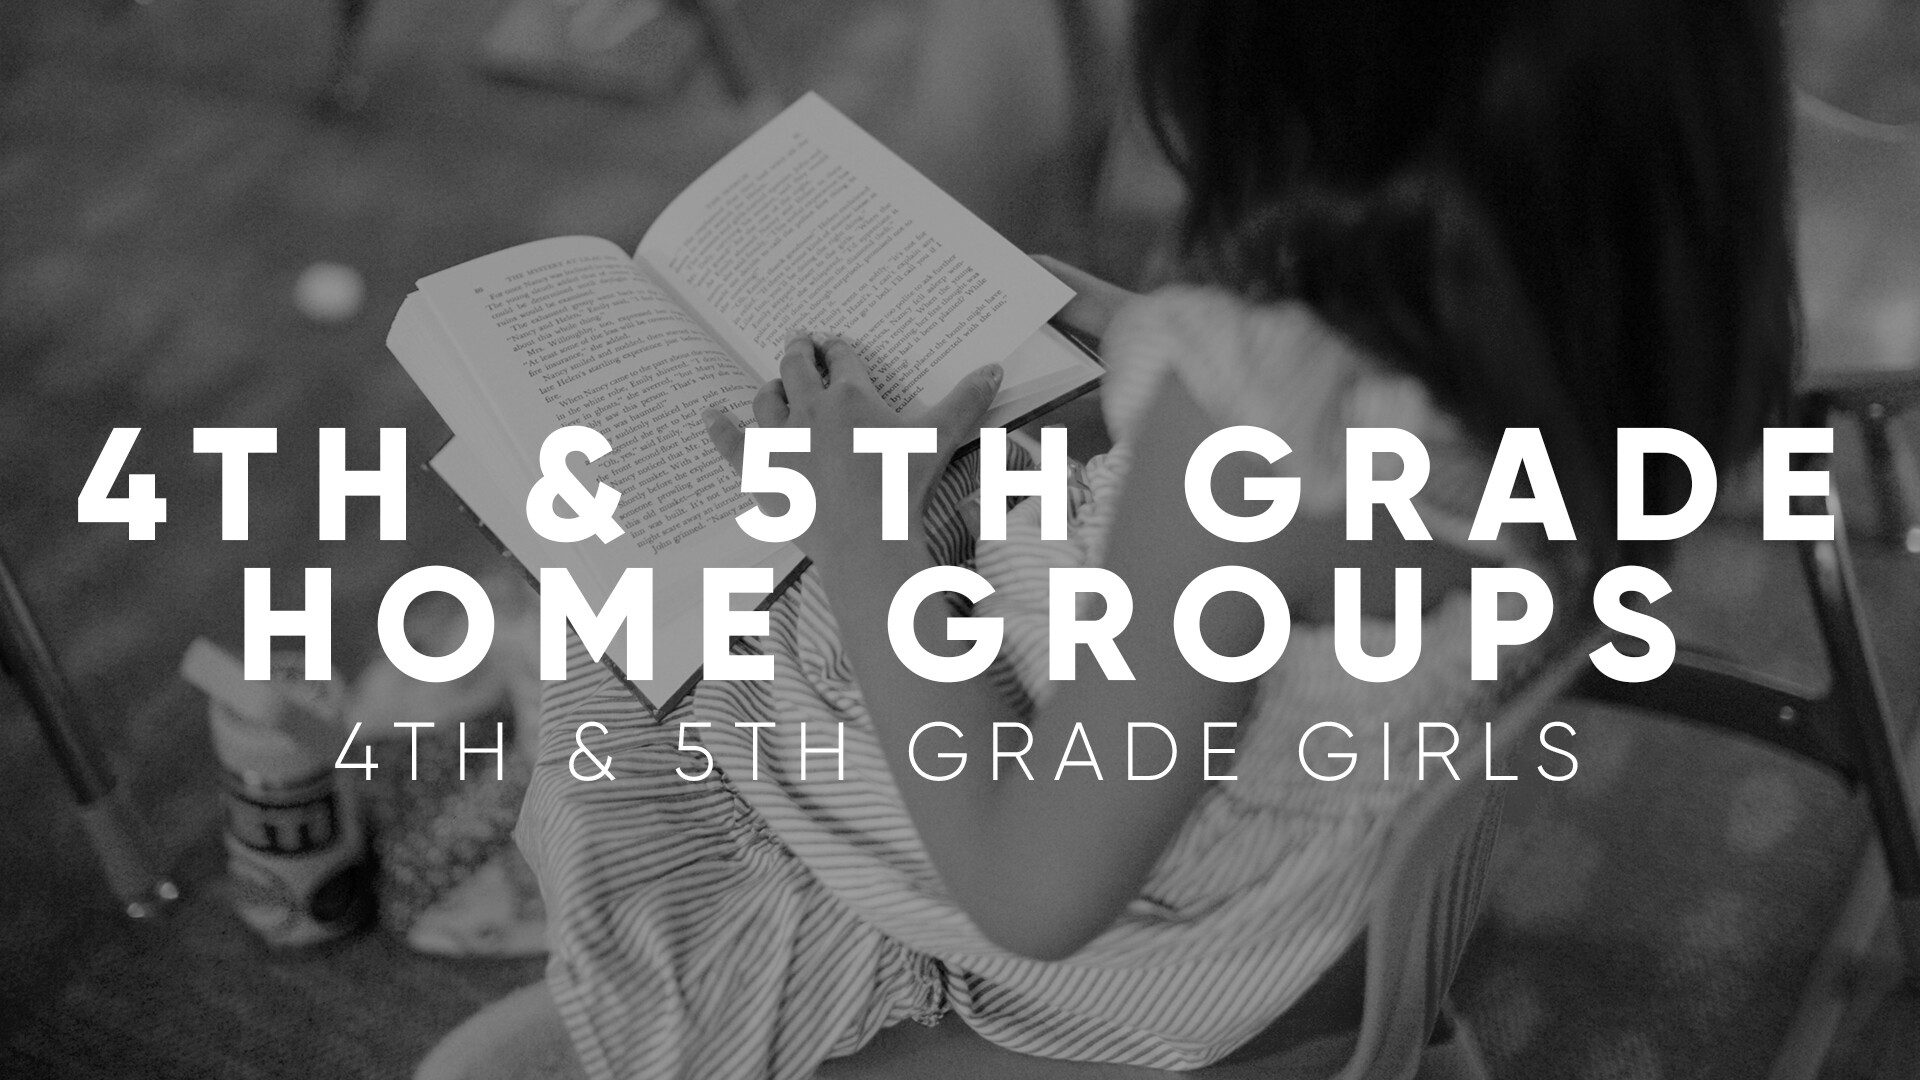 4th & 5th Grade Girls Home Group